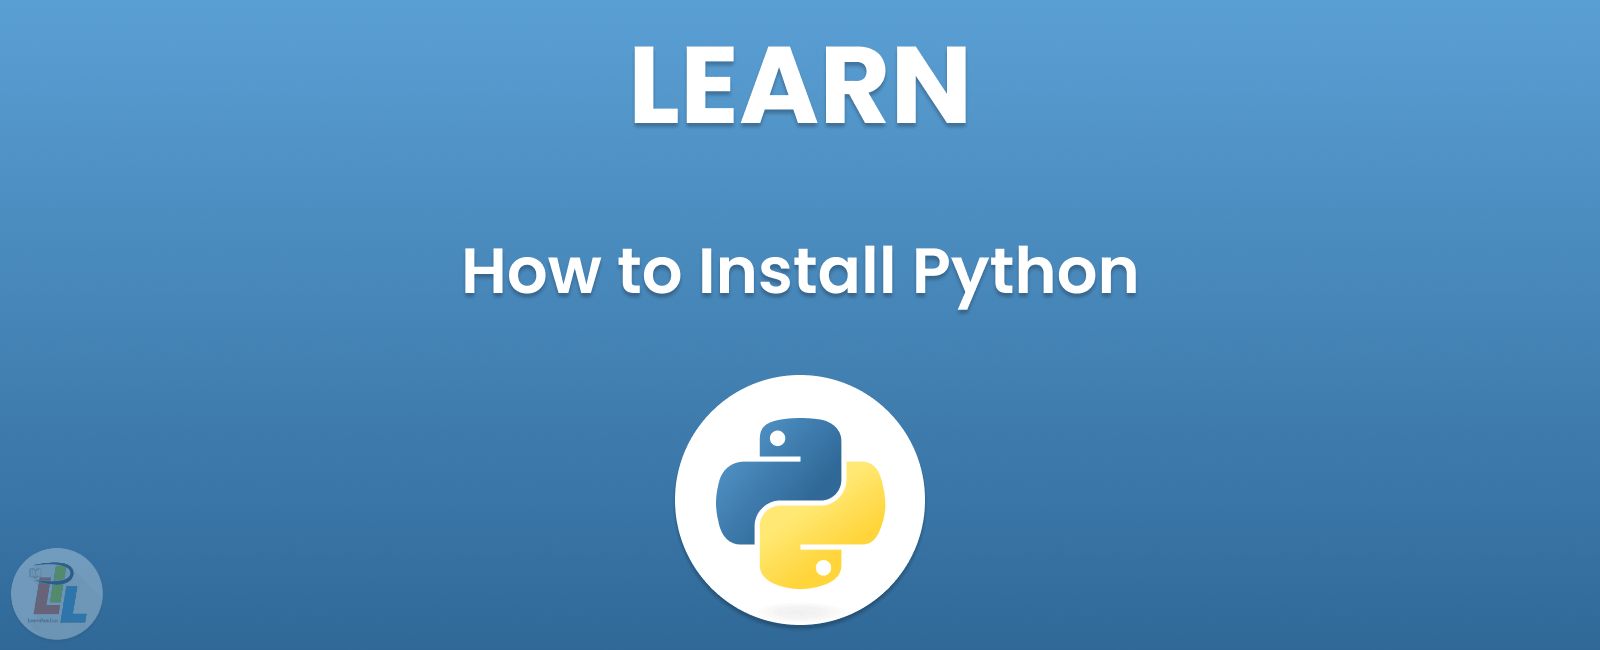 Learn How to Install Python: A Comprehensive Guide